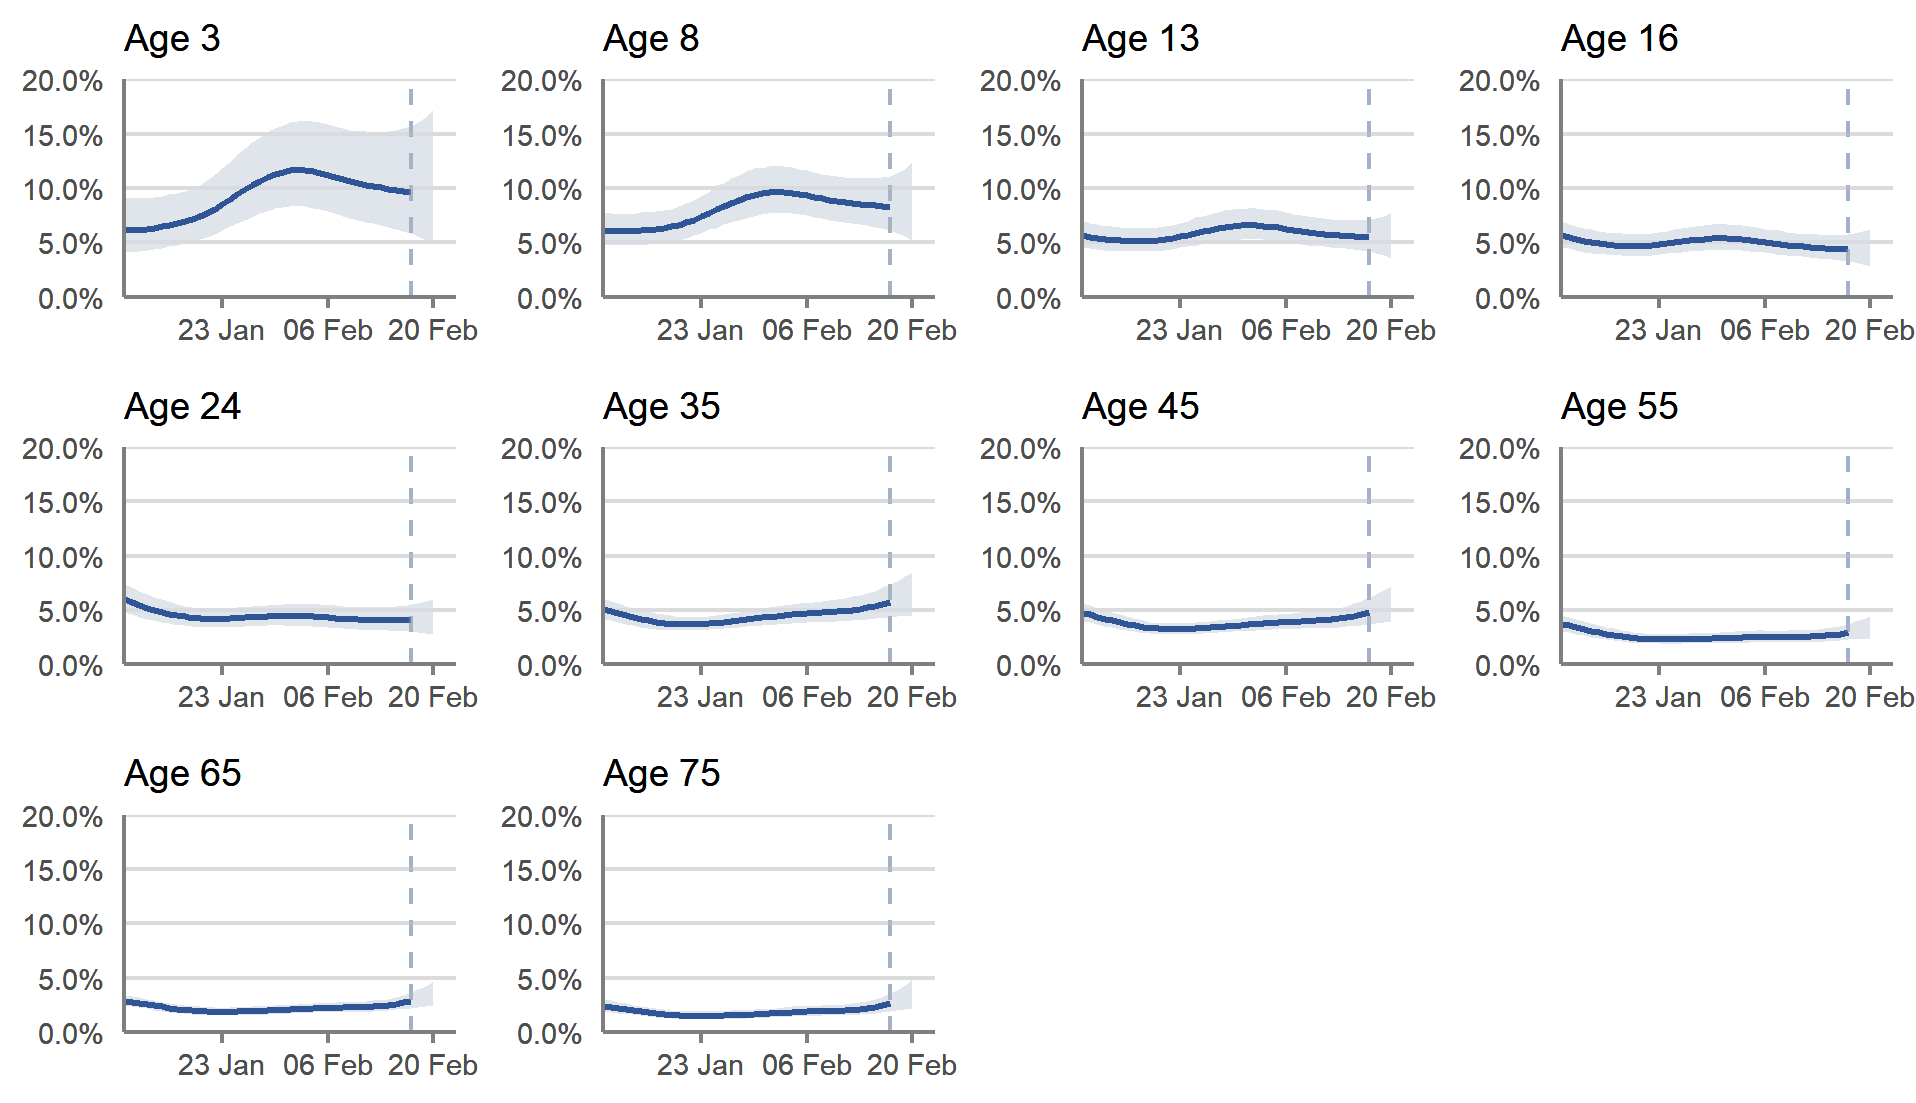 In Scotland, the estimated percentage of the population testing positive for COVID-19 has increased for those aged above 40 years in the week ending 20 February 2022. The trend was uncertain for those aged under 40 years due to wide confidence intervals.